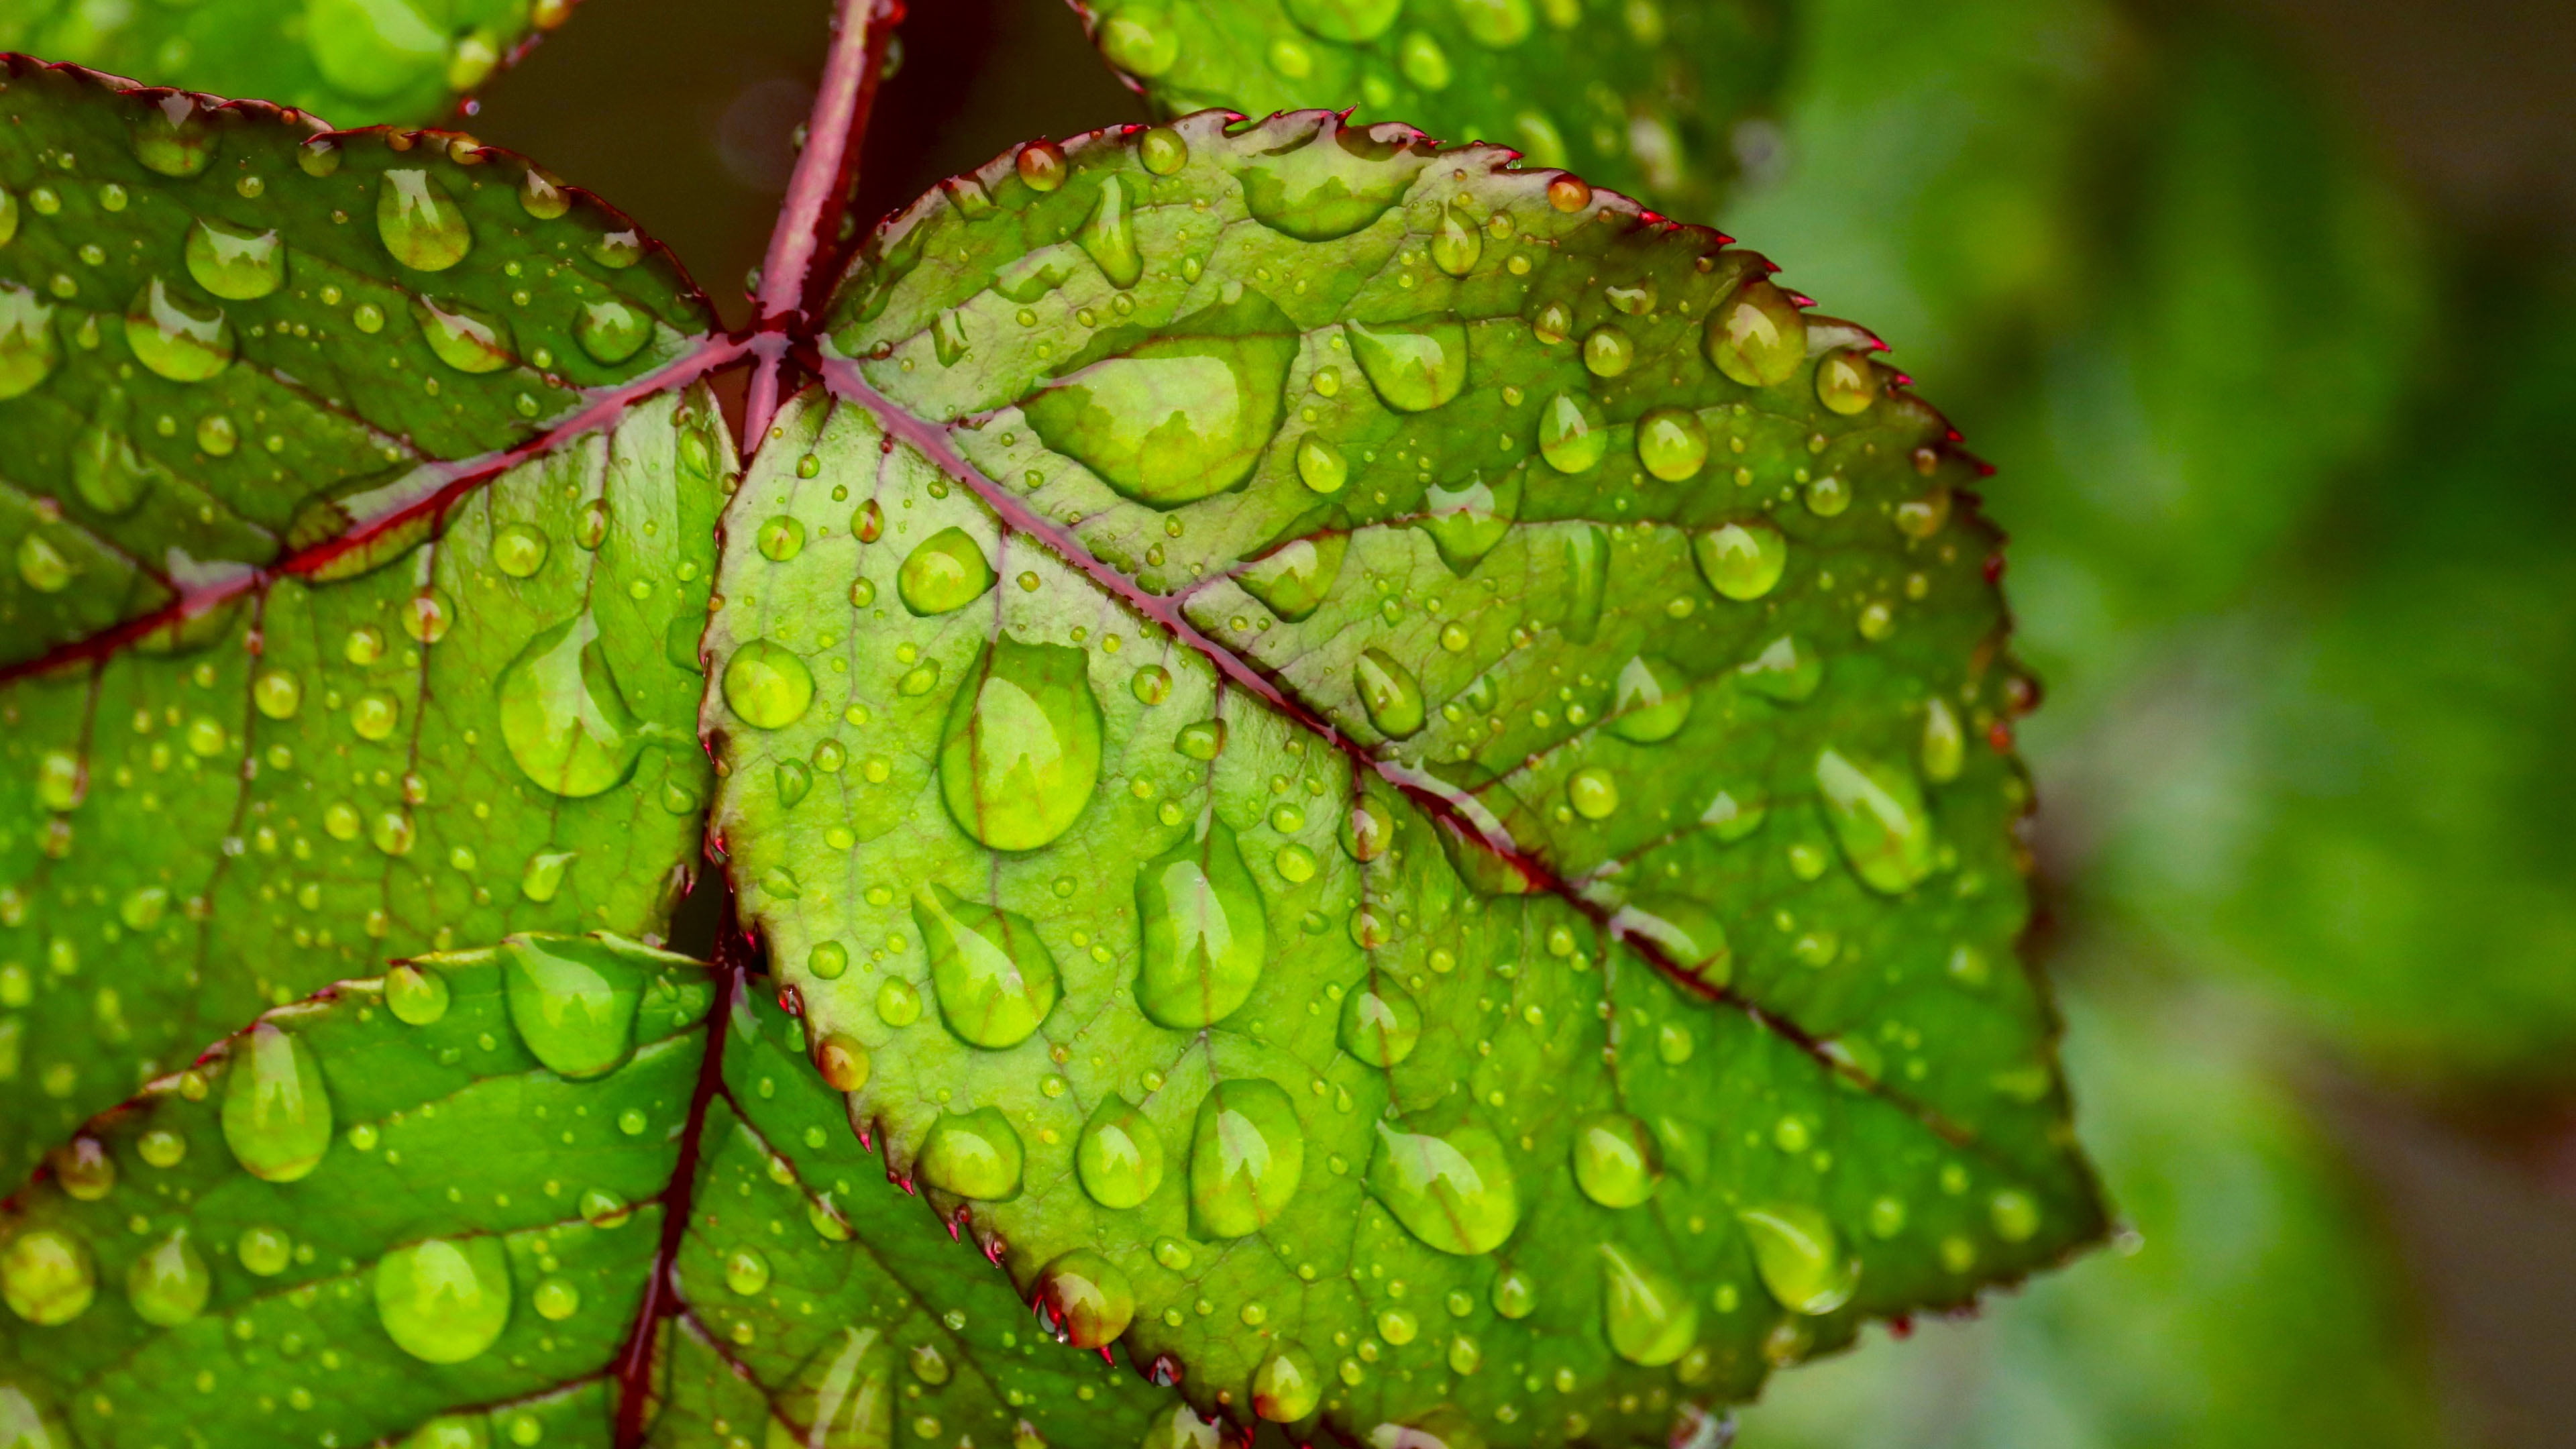 Water droplets on green leaf 4K Ultra HD Wallpapers for Mobile phones Tablet and PC 3840×2160